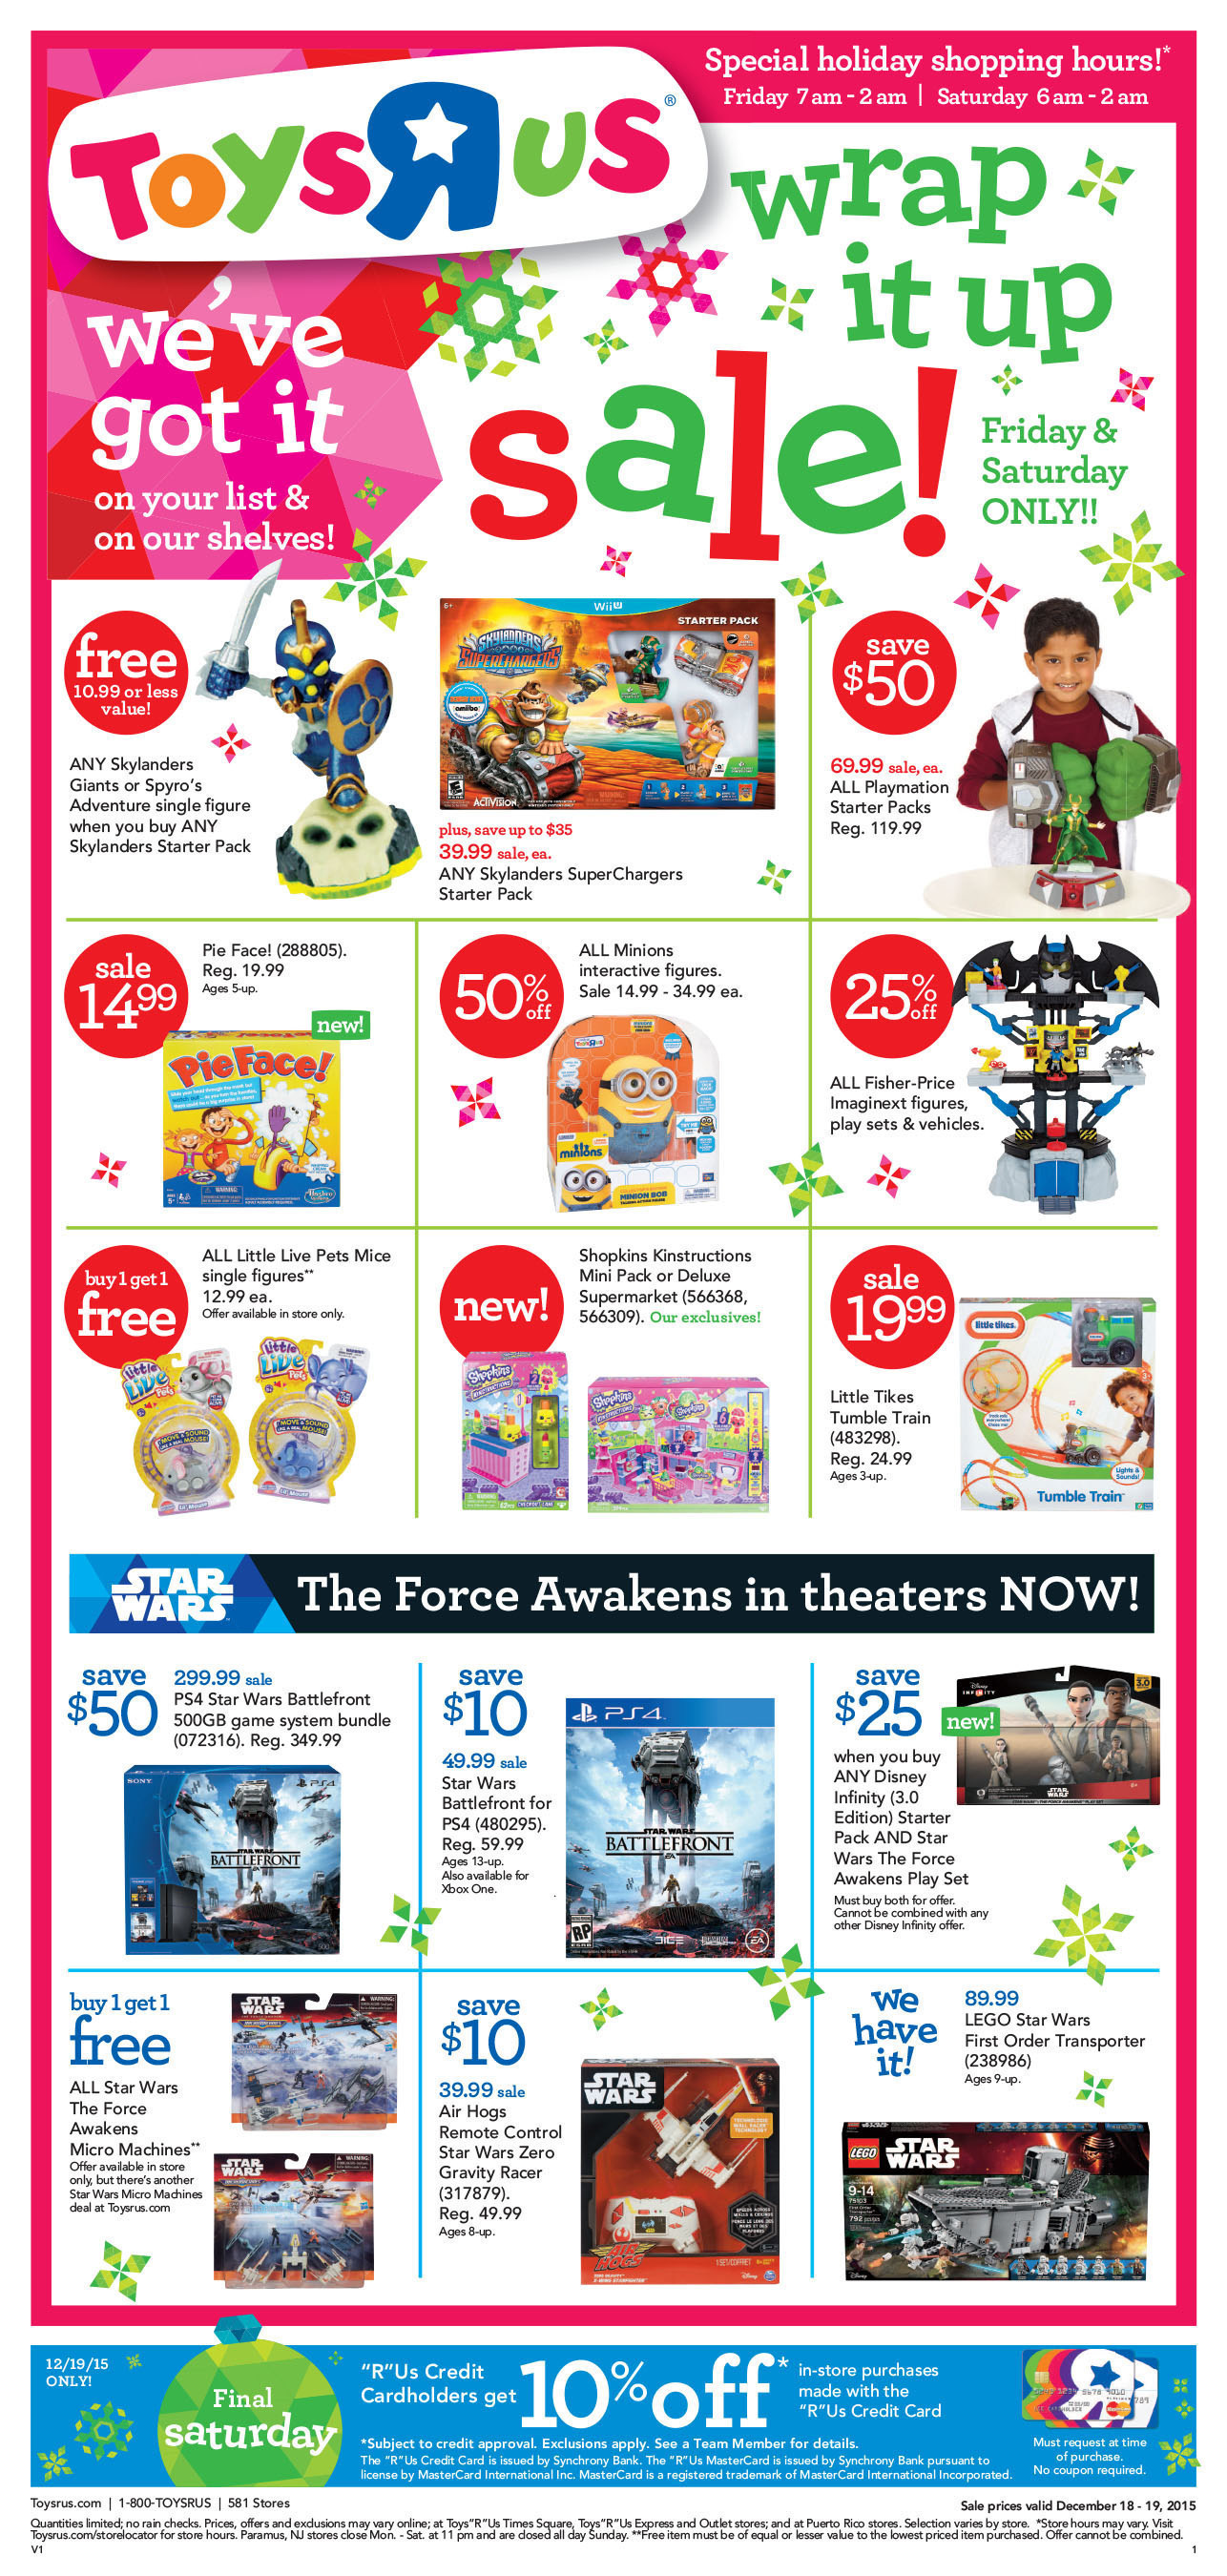 special offers on toys